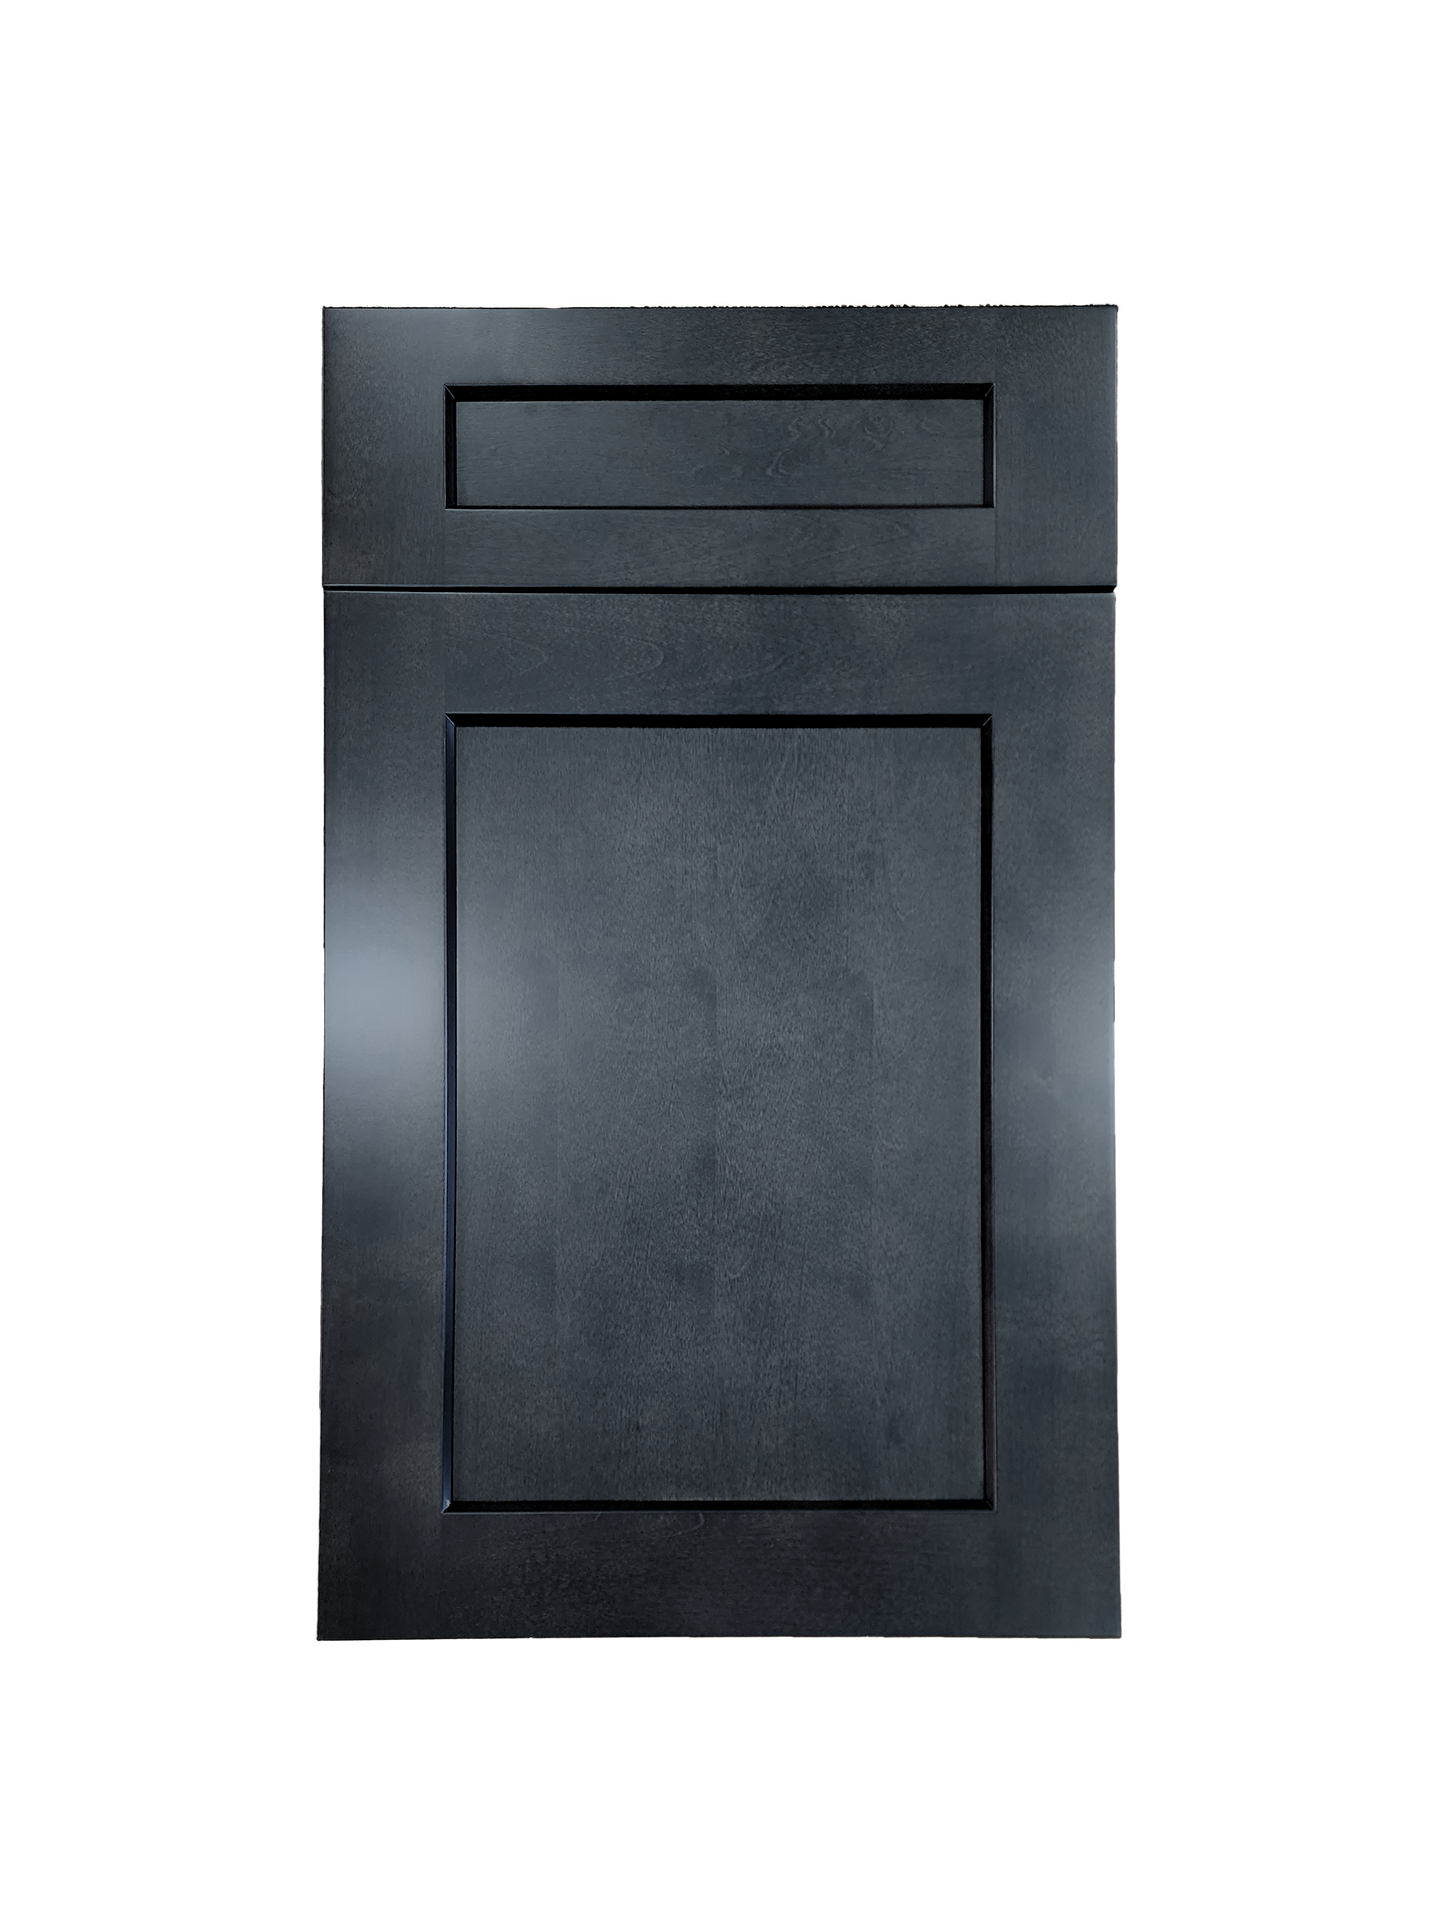 Stormy Grey Wall Cabinet 12 inches wide 12 inches deep 30 inches tall with Stormy Grey box and Stormy Grey doors